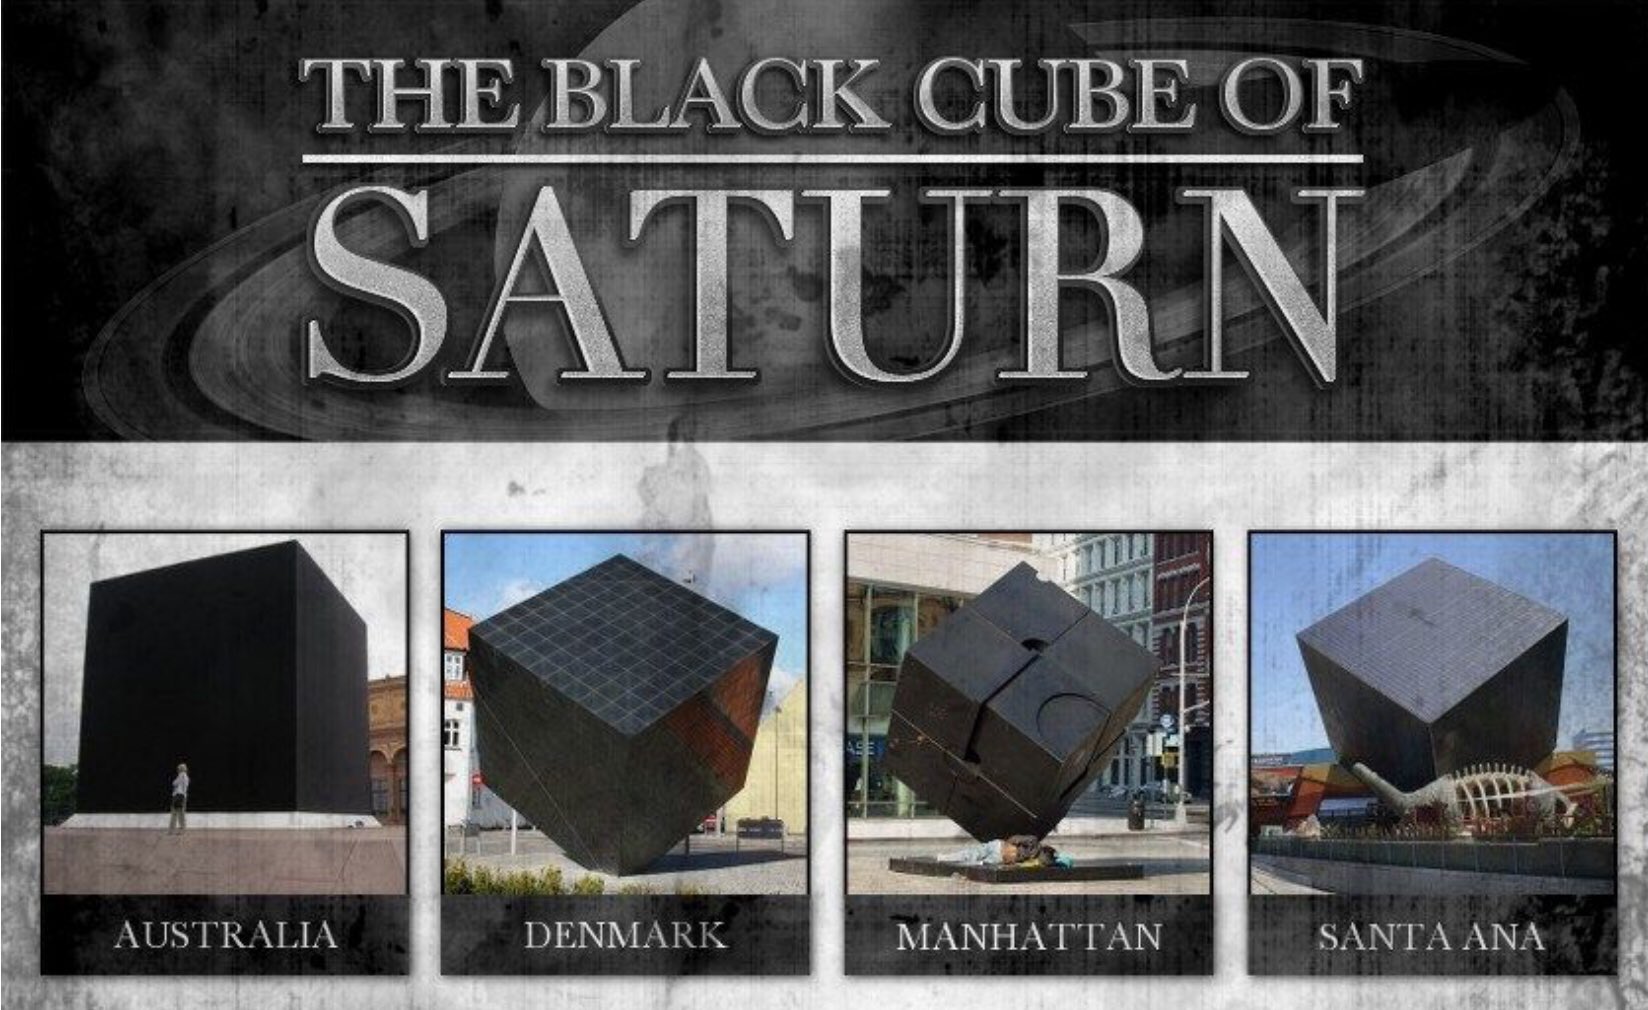 Ice Cube on Twitter: "A MESSAGE TO THE ENTIRE BLACK WORLD: To ALL Black  People no matter the Hue. Whenever your see the BLACK CUBE, it represents  YOU. Find out why... https://t.co/9ywR5ruSPl" /